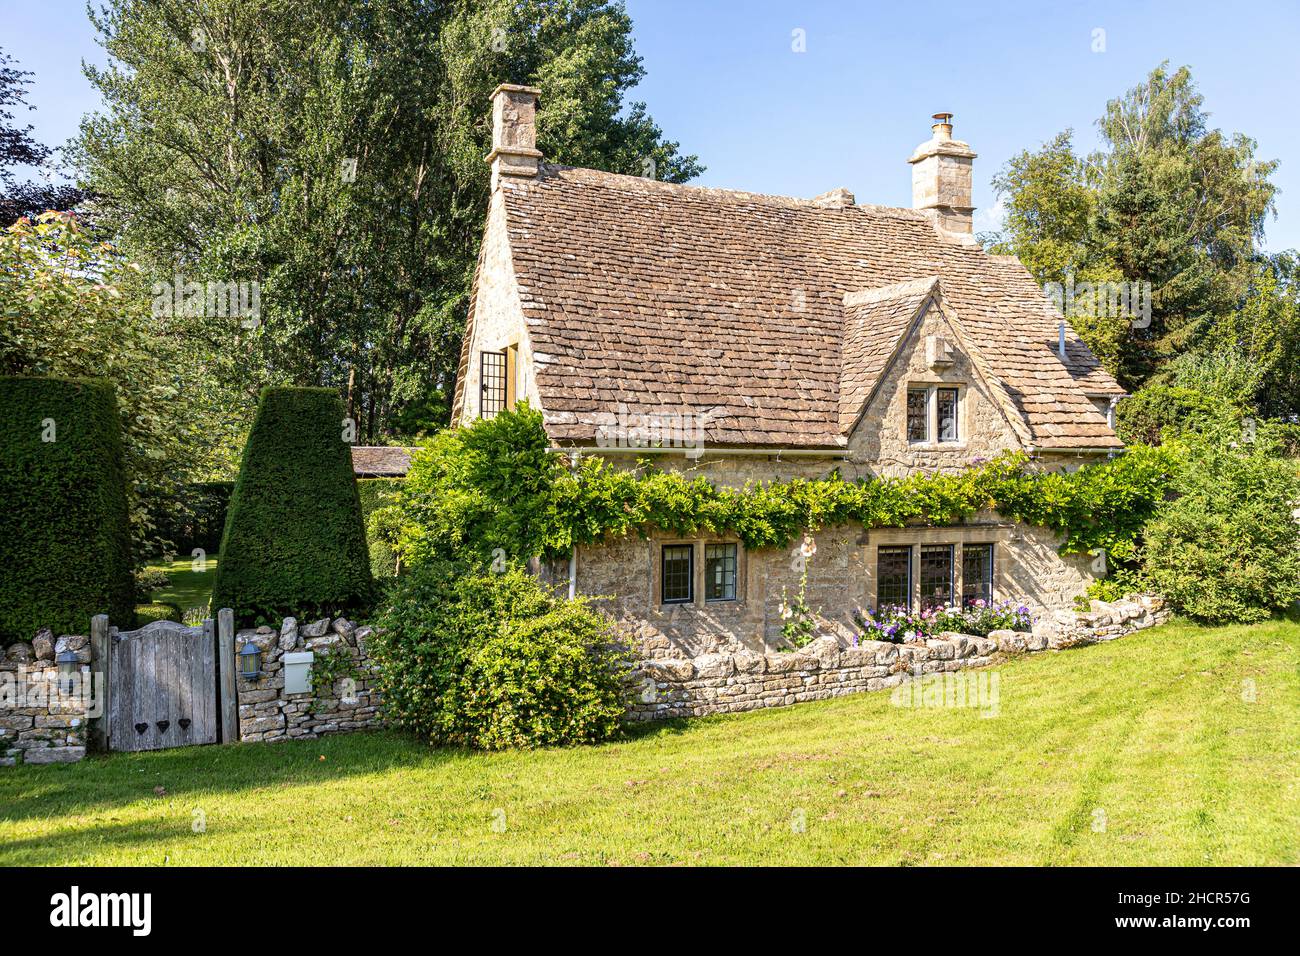 A traditional stone cottage in the Cotswold village of Little Barrington, Gloucestershire UK Stock Photo